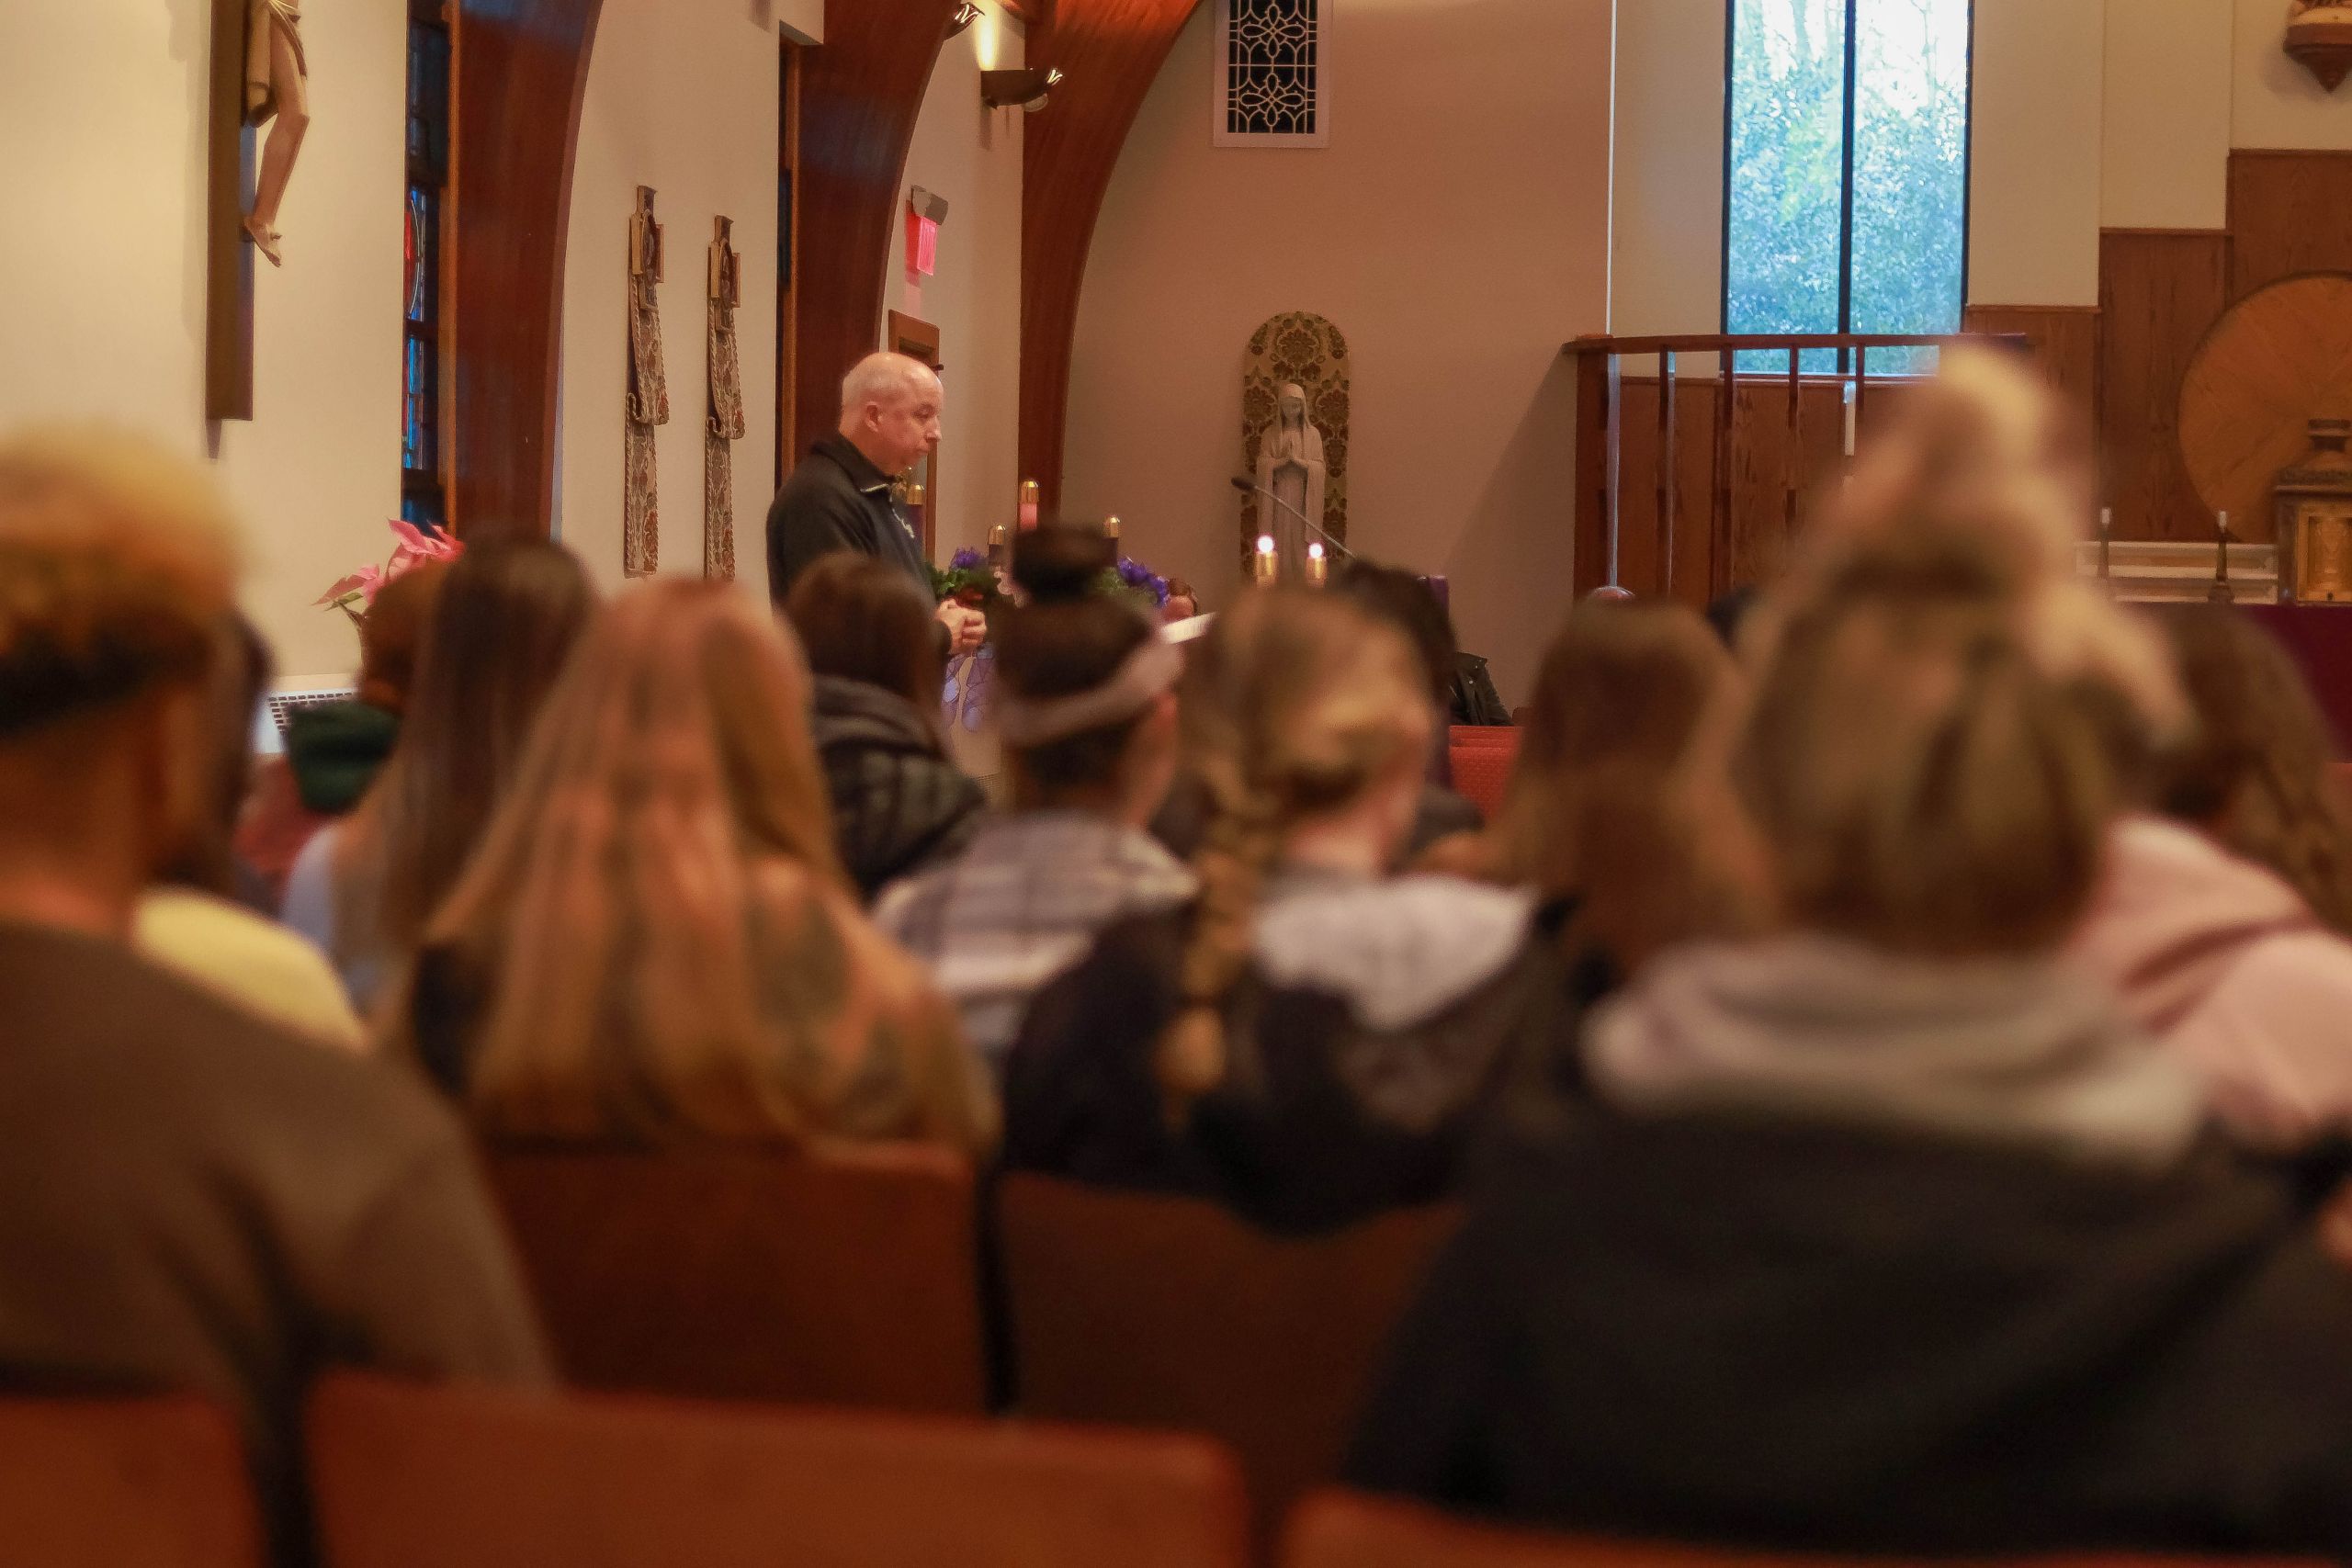 A priest leads a group of students in powerful prayer at prayer service in chapel 